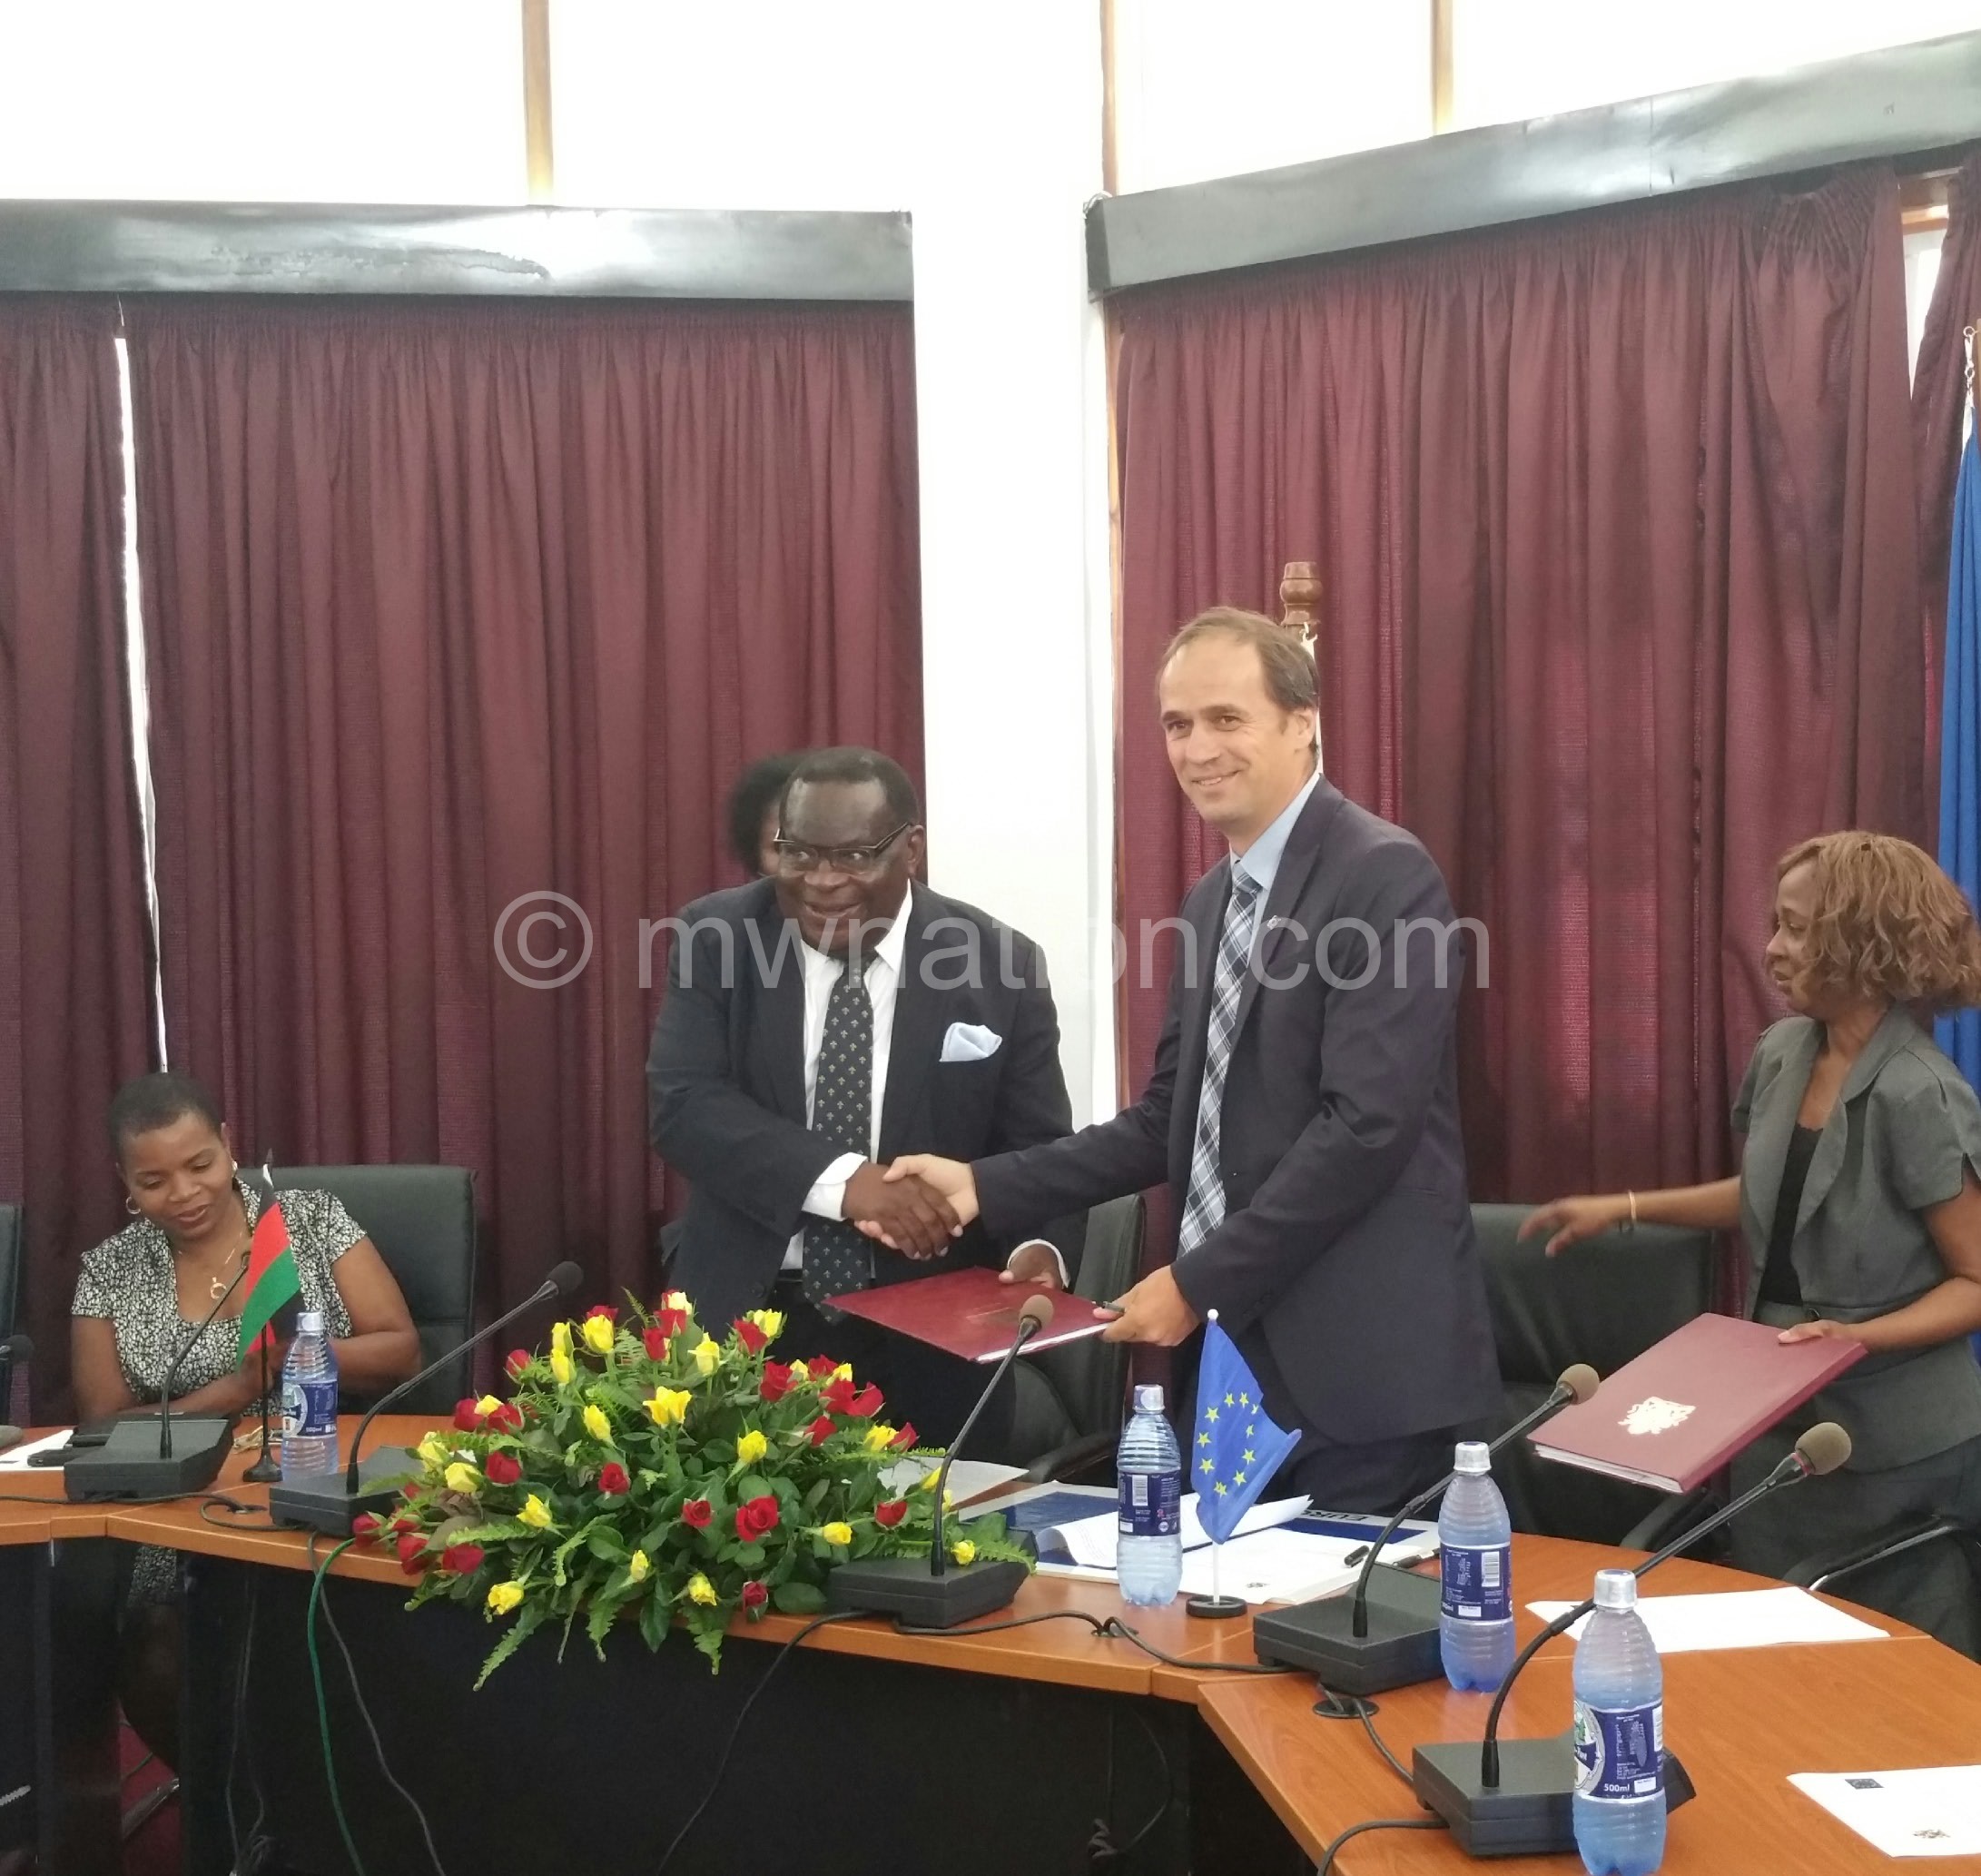 EU head of delegation to Malawi Marchel Gerrmann (R) and Minister of Finance Goodall Gondwe (L) exchanging signed agreements